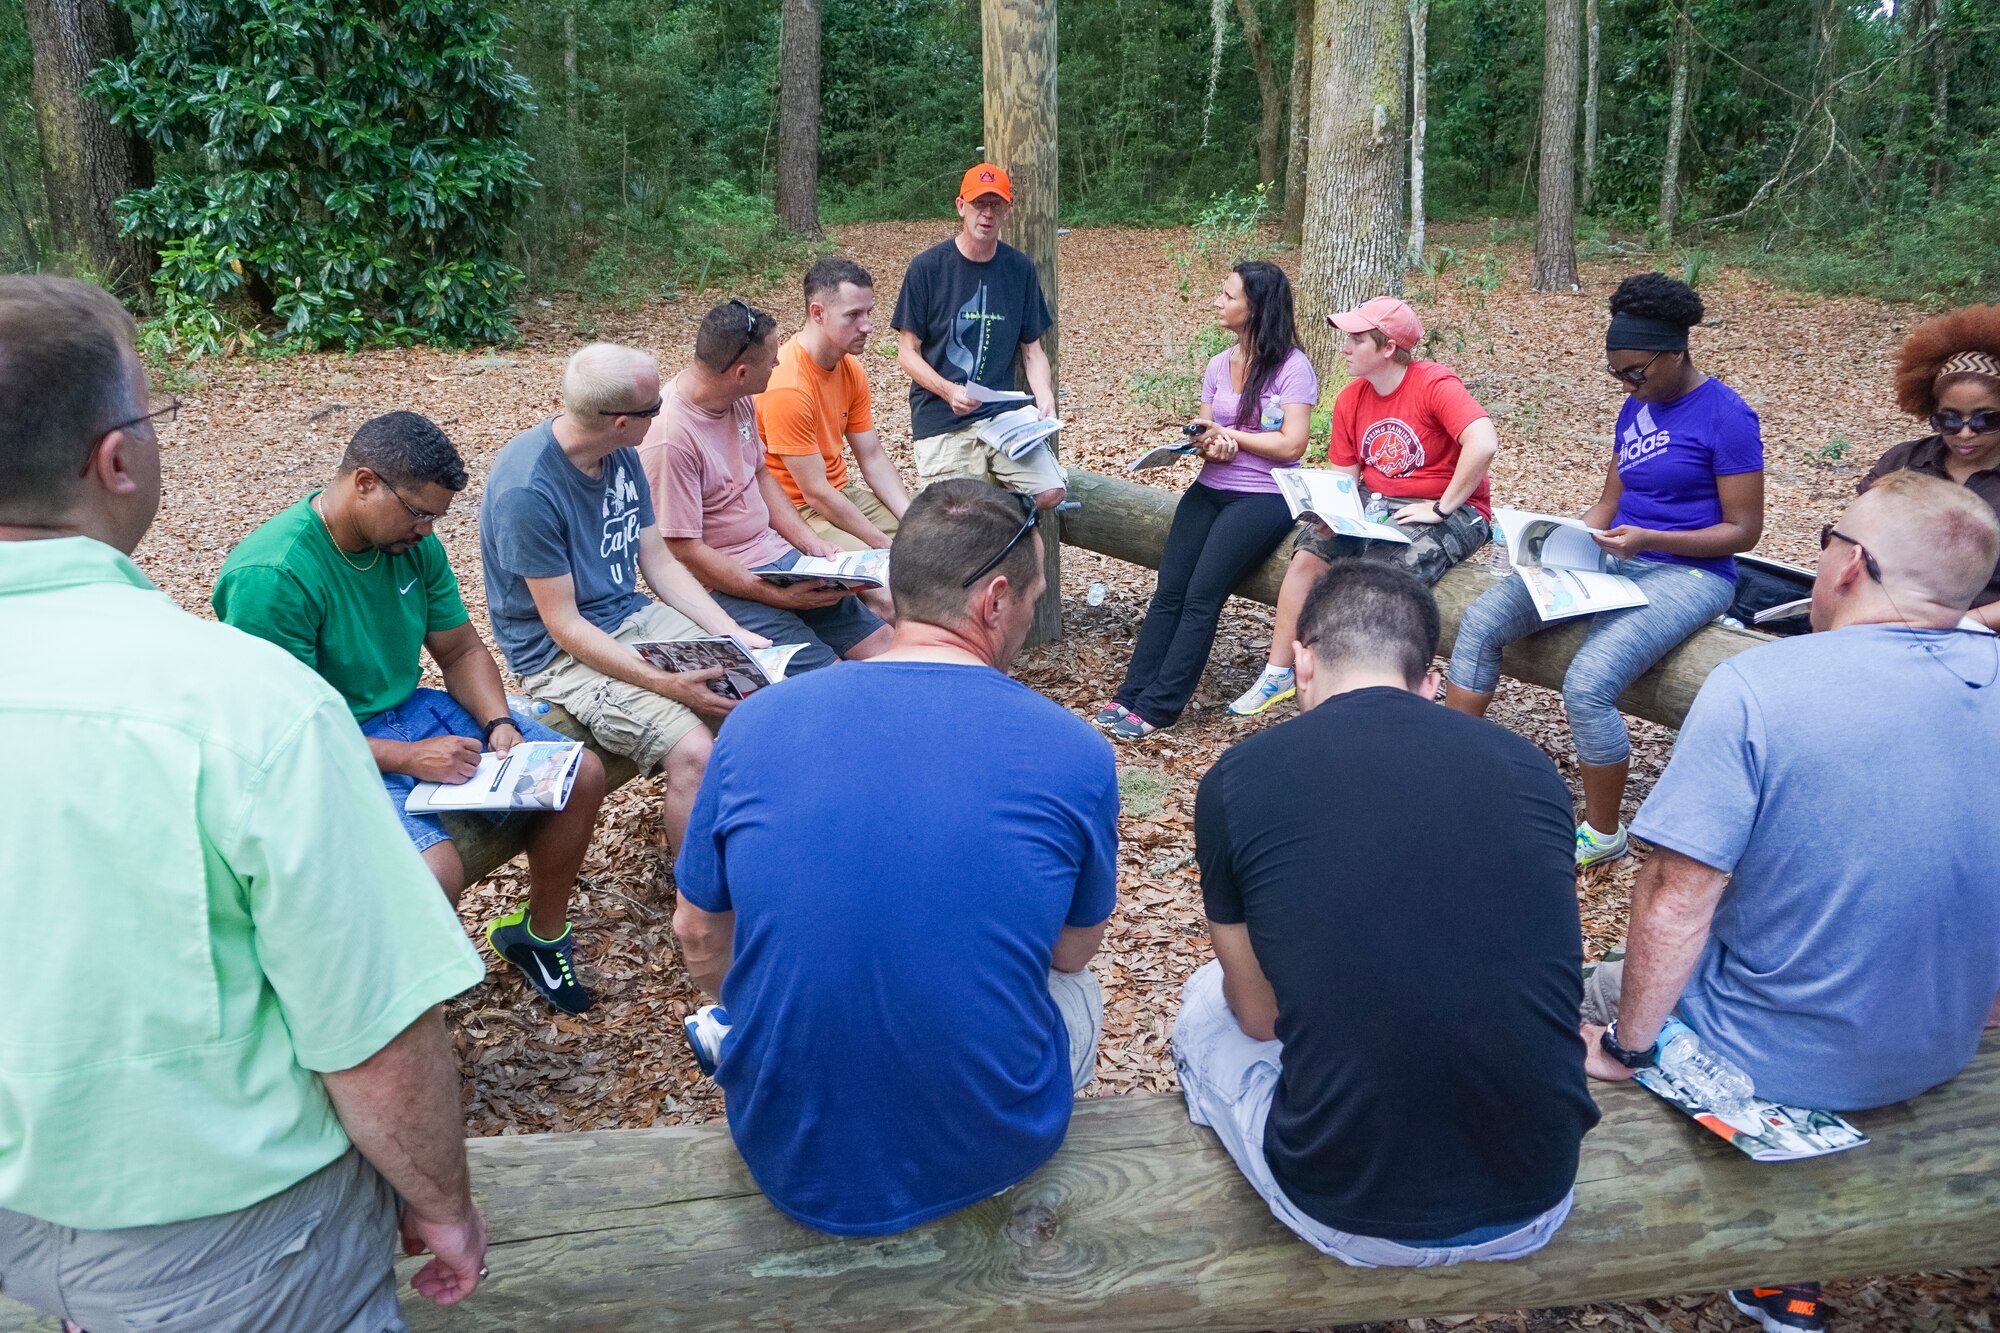 U.S. Air Force Maj. James Taylor, center, a chaplain and Strong Bonds instructor with the 116th Air Control Wing, Georgia Air National Guard, leads a class on relationship building during the outdoor adventure course at the Strong Bonds singles retreat at the Sea Palms Resort, Saint Simons Island, Ga., June 27, 2015. The retreat, hosted by chaplains from the 116th Air Control wing, is a key component of the unit's resiliency program aimed at helping Airmen from Air National Guard units across Georgia to build relationships, learn to trust people, and hone their teambuilding skills. (U.S. Air National Guard photo by Senior Master Sgt. Roger Parsons/Released)